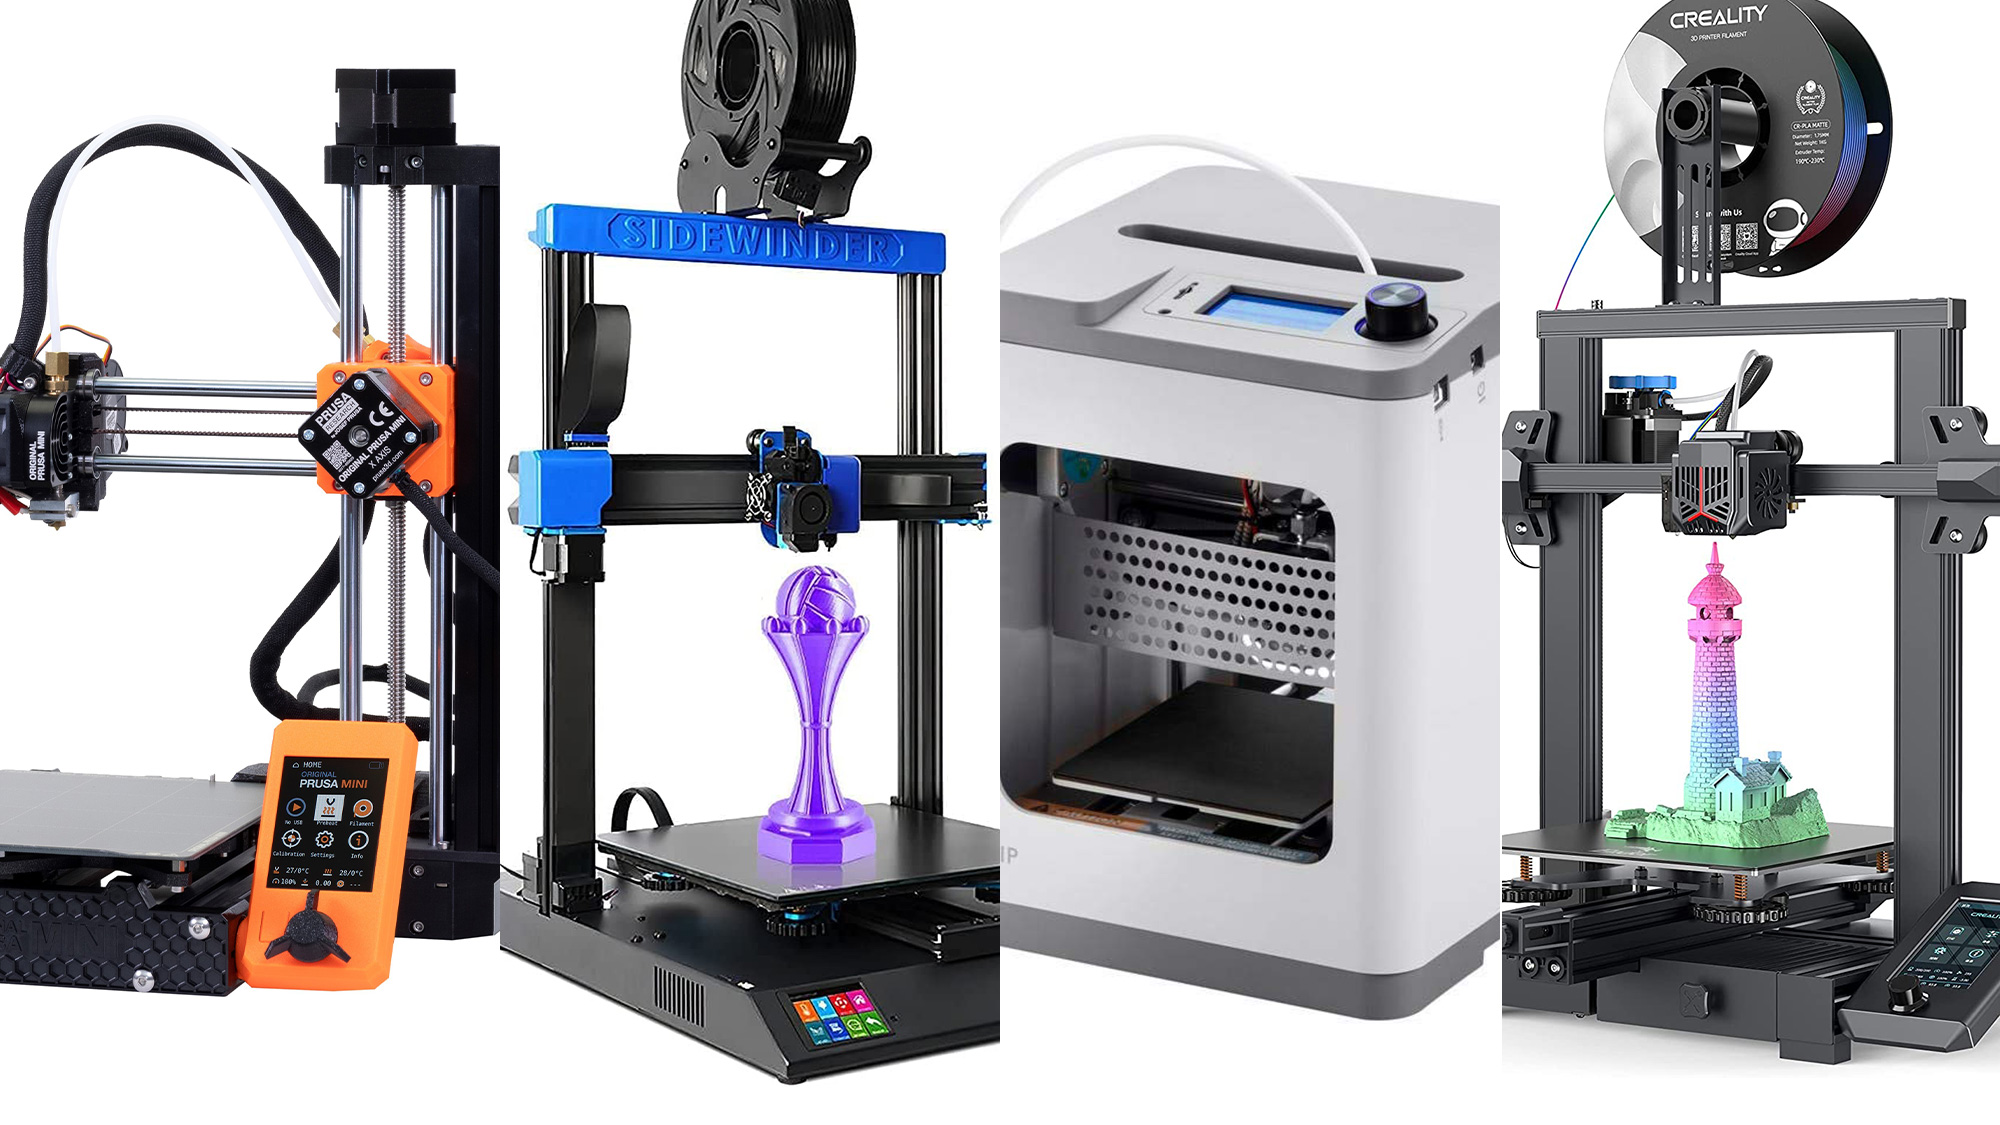 Tipp I just found out: If you want to print many small pieces in many  different colors and dont want to spend much money. Just buy 3D Pen Filament.  Paid 15€ for